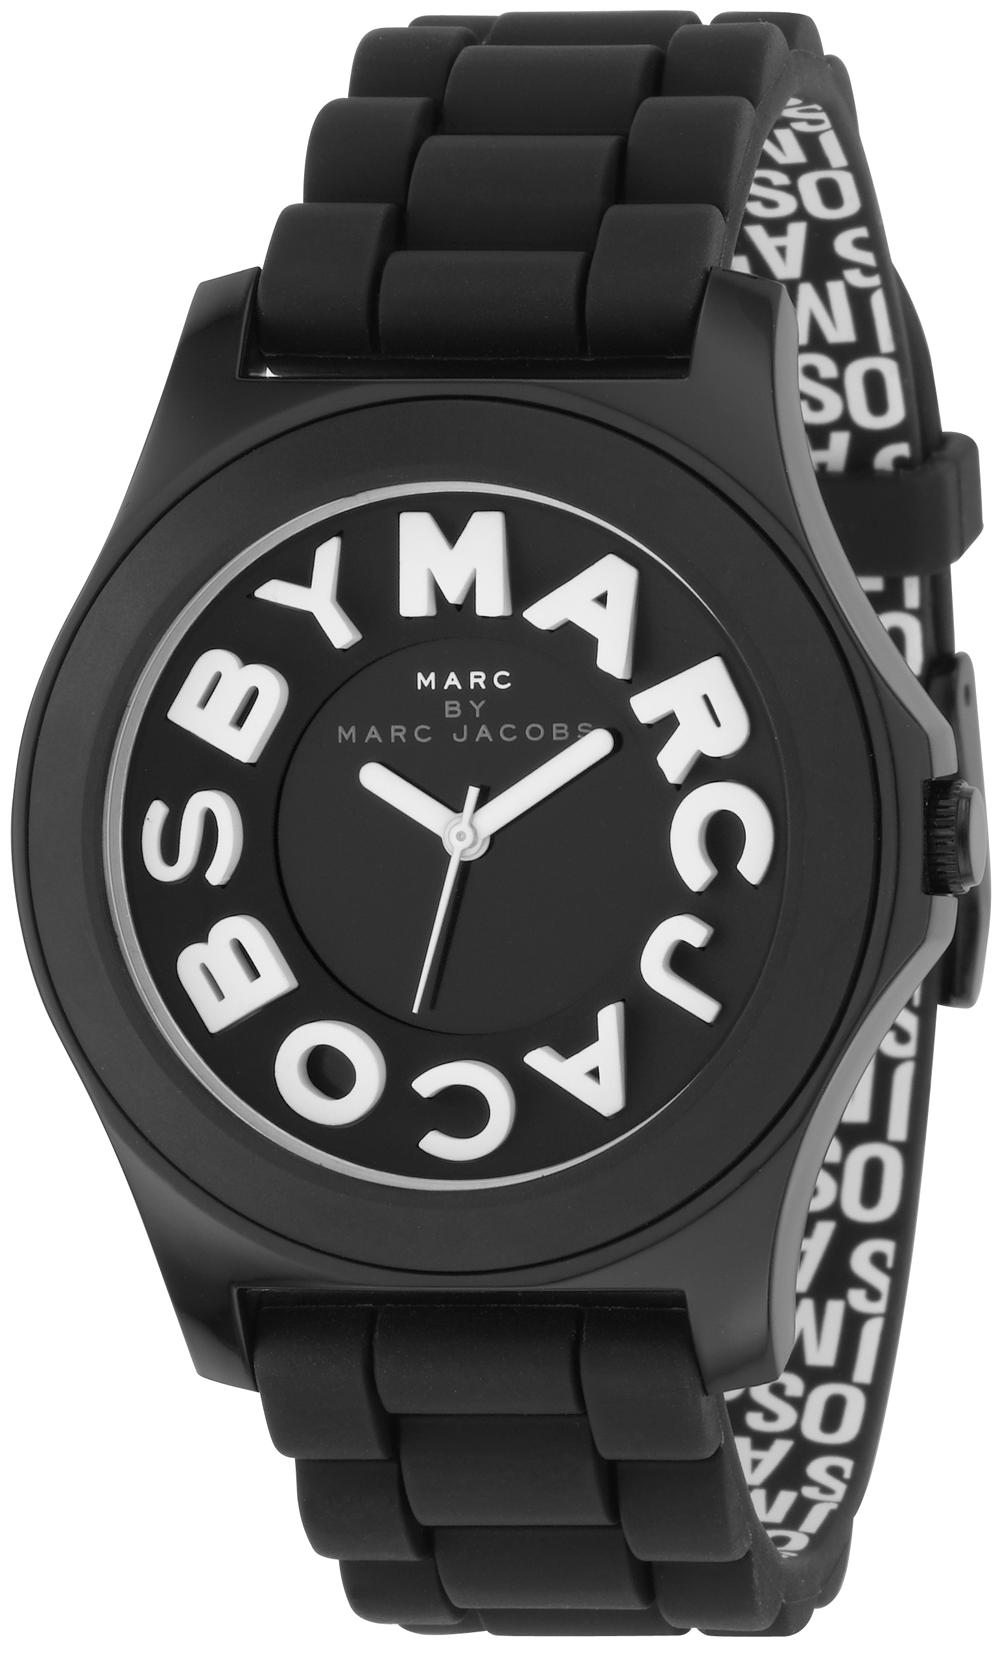 Top Watches: Fake marc jacobs watches in Bulgaria